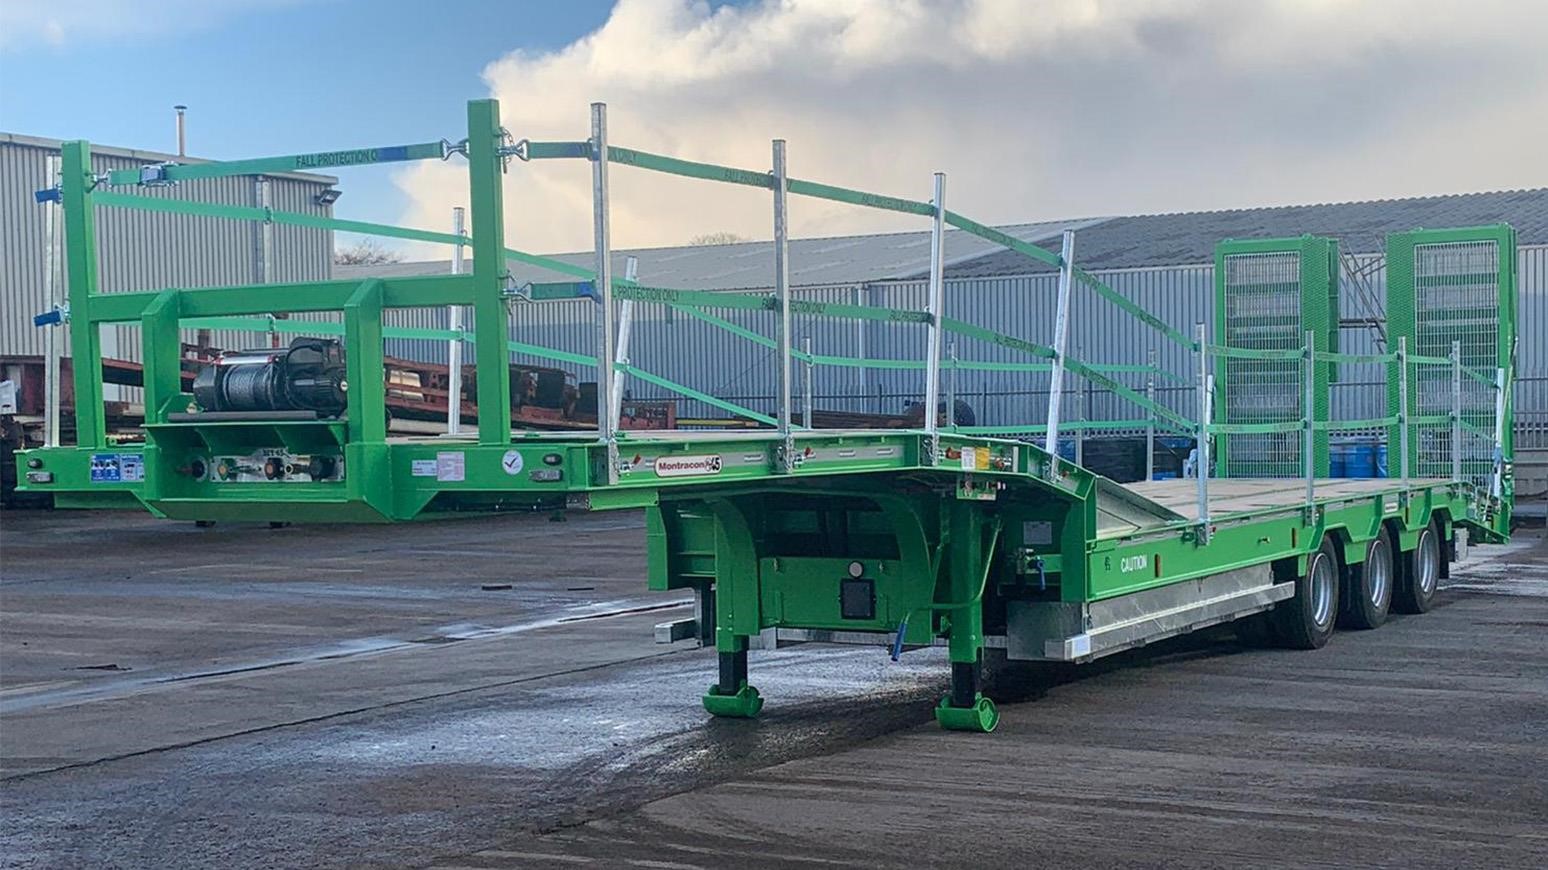 North Lincolnshire-Based Machine Hire Specialist Adds New Montracon MT45 A3 Machine Carrier Trailer